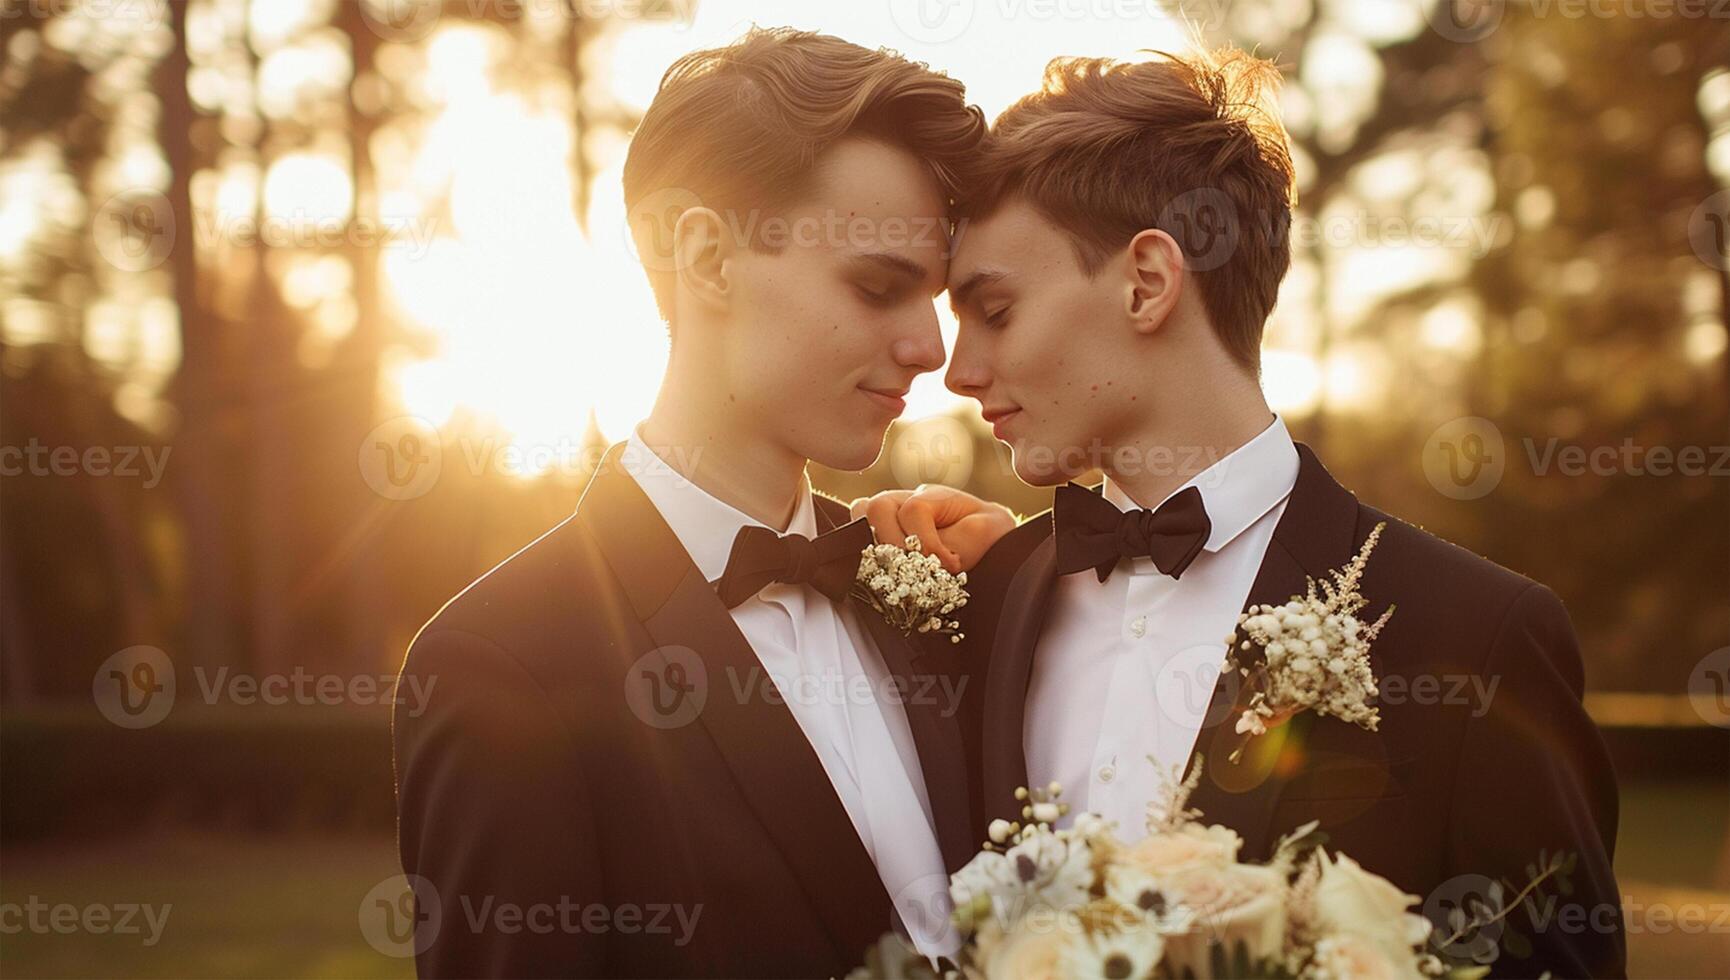 photography of two handsome young men in tuxedo and bow tie, holding wedding bouquet at sunset, gay couple photo